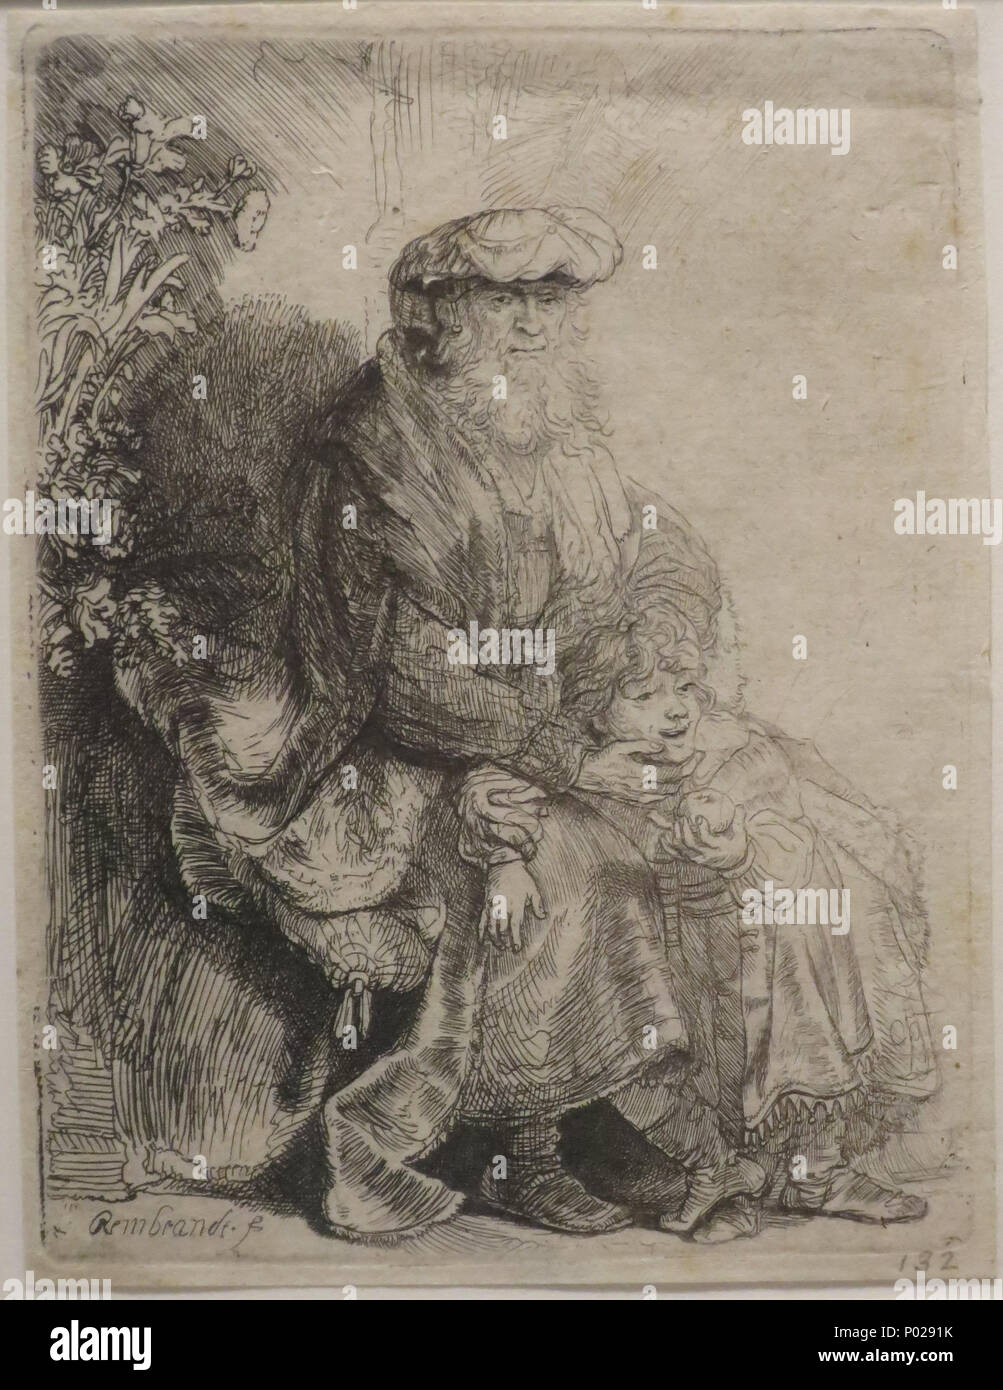 . English: Abraham Caressing Isaac, etching by Rembrandt, c. 1637, Honolulu Museum of Art accession 10596  . circa 1637.   Rembrandt  (1606–1669)       Alternative names Rembrandt van Rijn, Birth name: Rembrandt Harmenszoon van Rijn, Rembrandt Harmensz. van Rijn  Description Dutch painter, printmaker and draughtsman  Date of birth/death 15 July 1606 4 October 1669  Location of birth/death Leiden Amsterdam  Work period between circa 1625 and circa 1669  Work location Leiden (1620-1624), Amsterdam (1624-1625), Leiden (1625-1633), Amsterdam (1631-1669)  Authority control  : Q5598 VIAF:?64013650 I Stock Photo